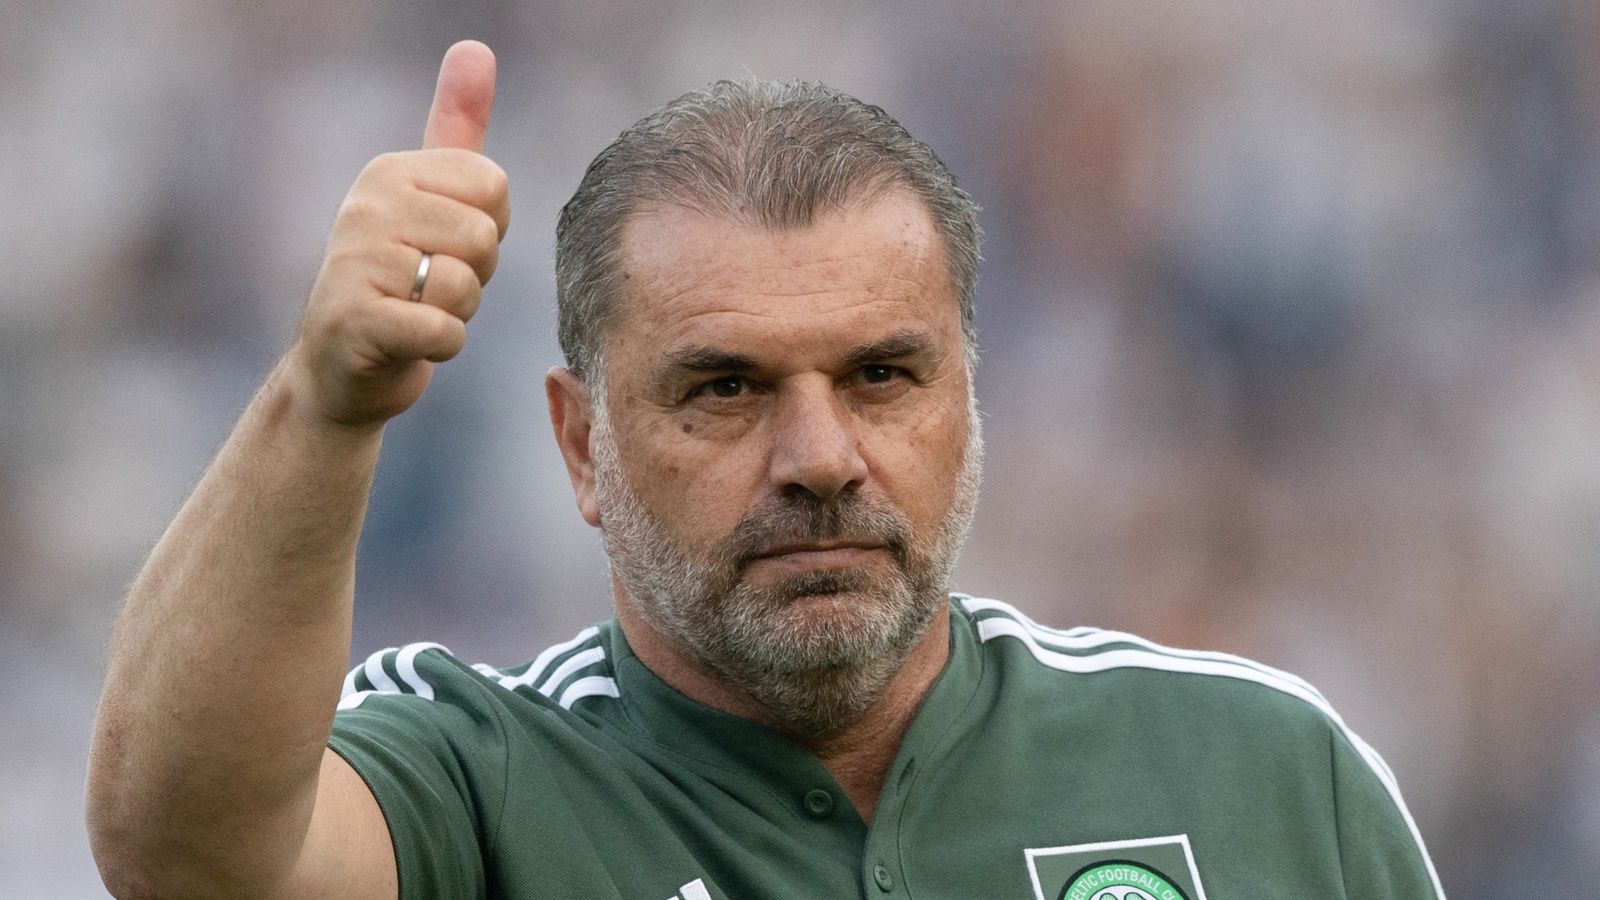 Celtic: Ferenc Puskas would be proud to see me take on Real Madrid, says Ange Postecoglou